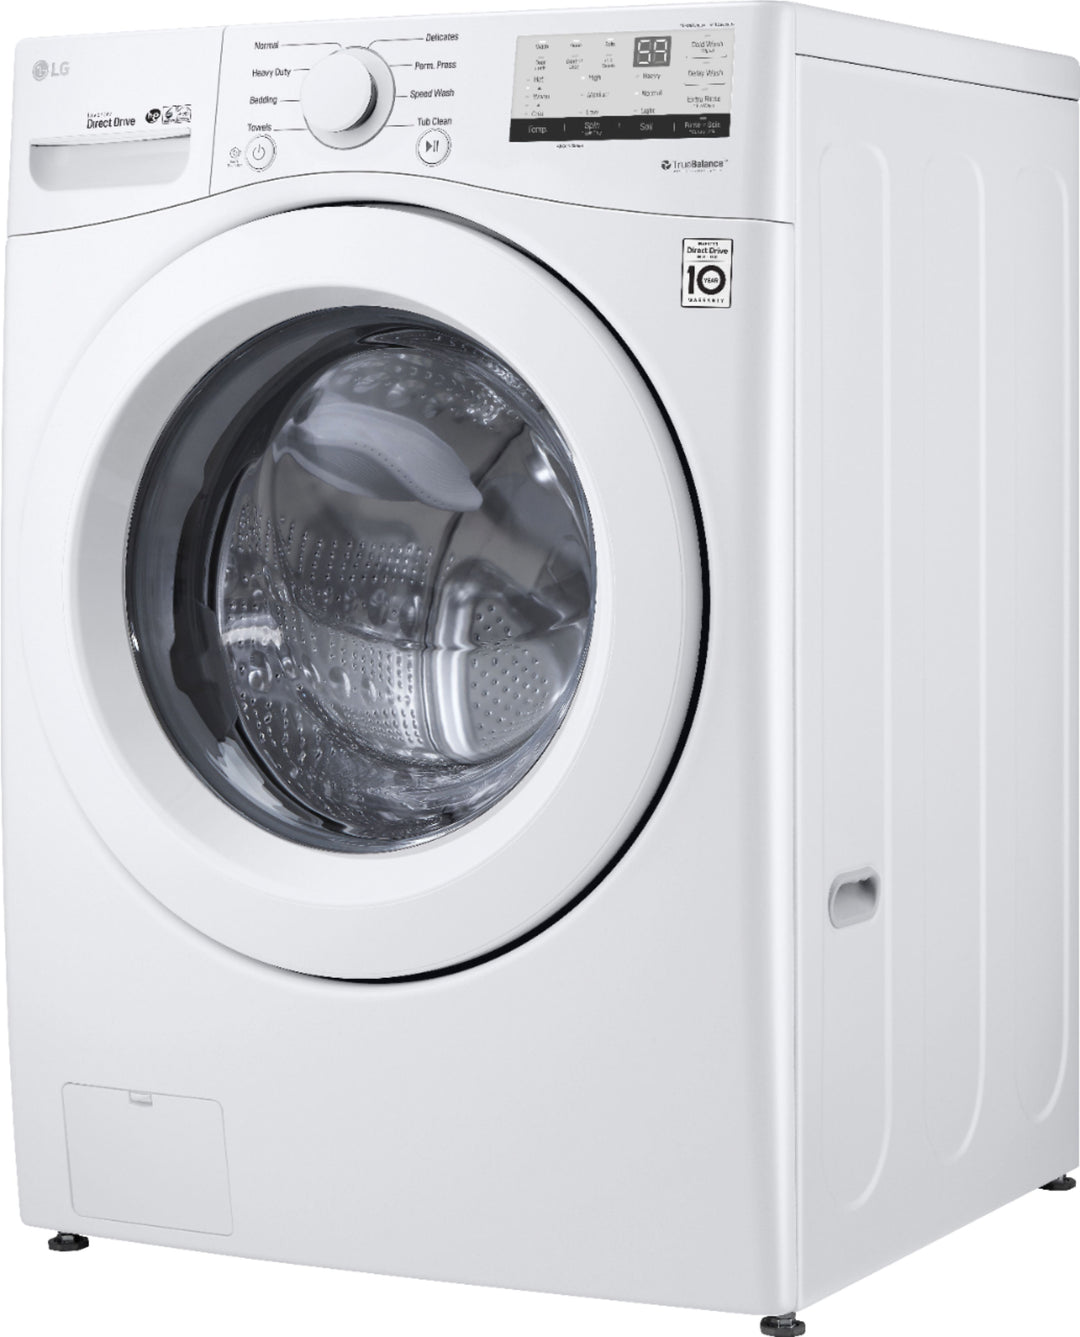 LG - 4.5 Cu. Ft. High Efficiency Stackable Front-Load Washer with 6Motion Technology - White_12